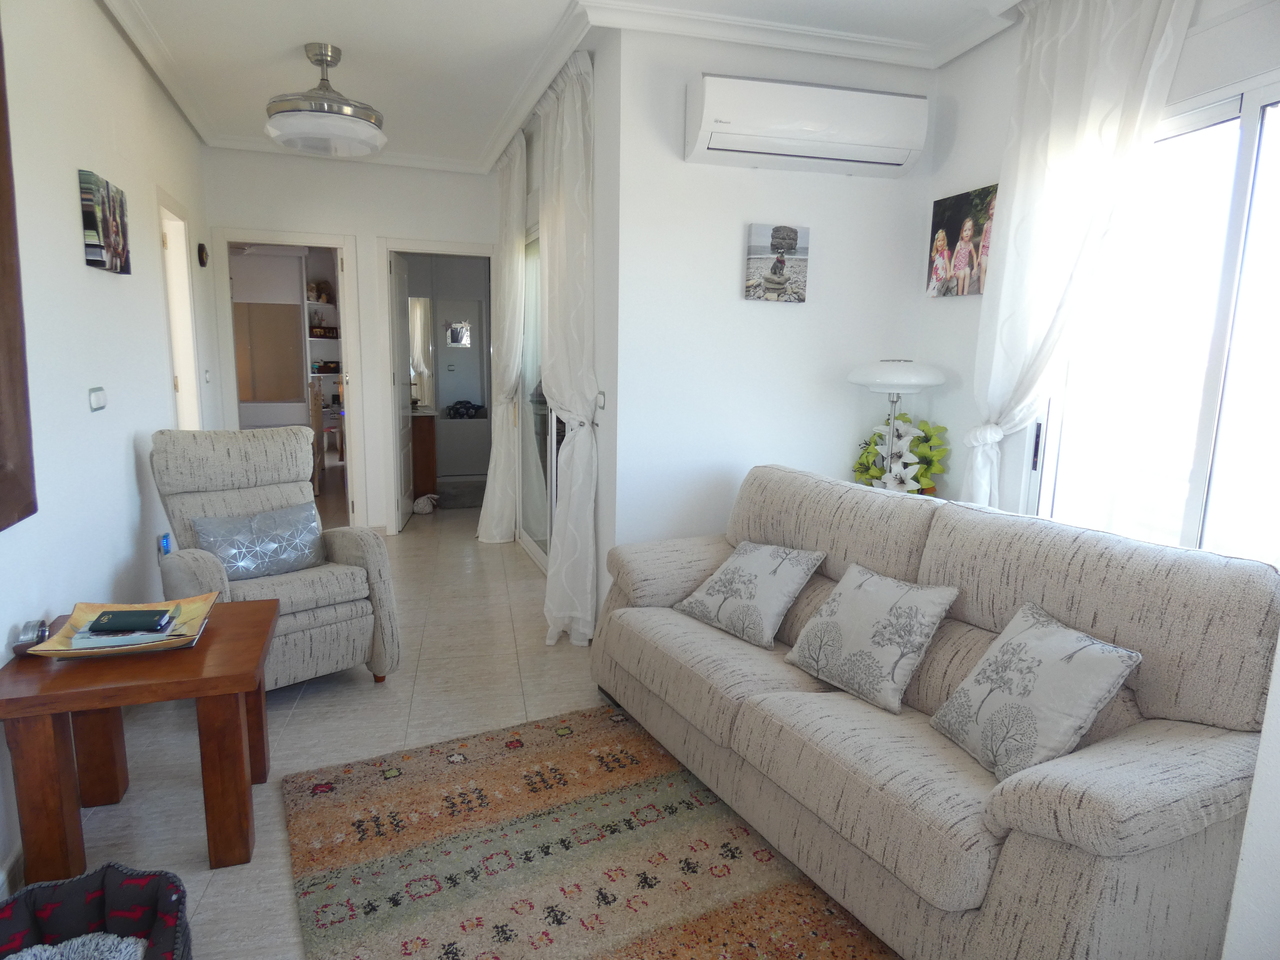 HCB-597: Apartment for sale in Almoradi